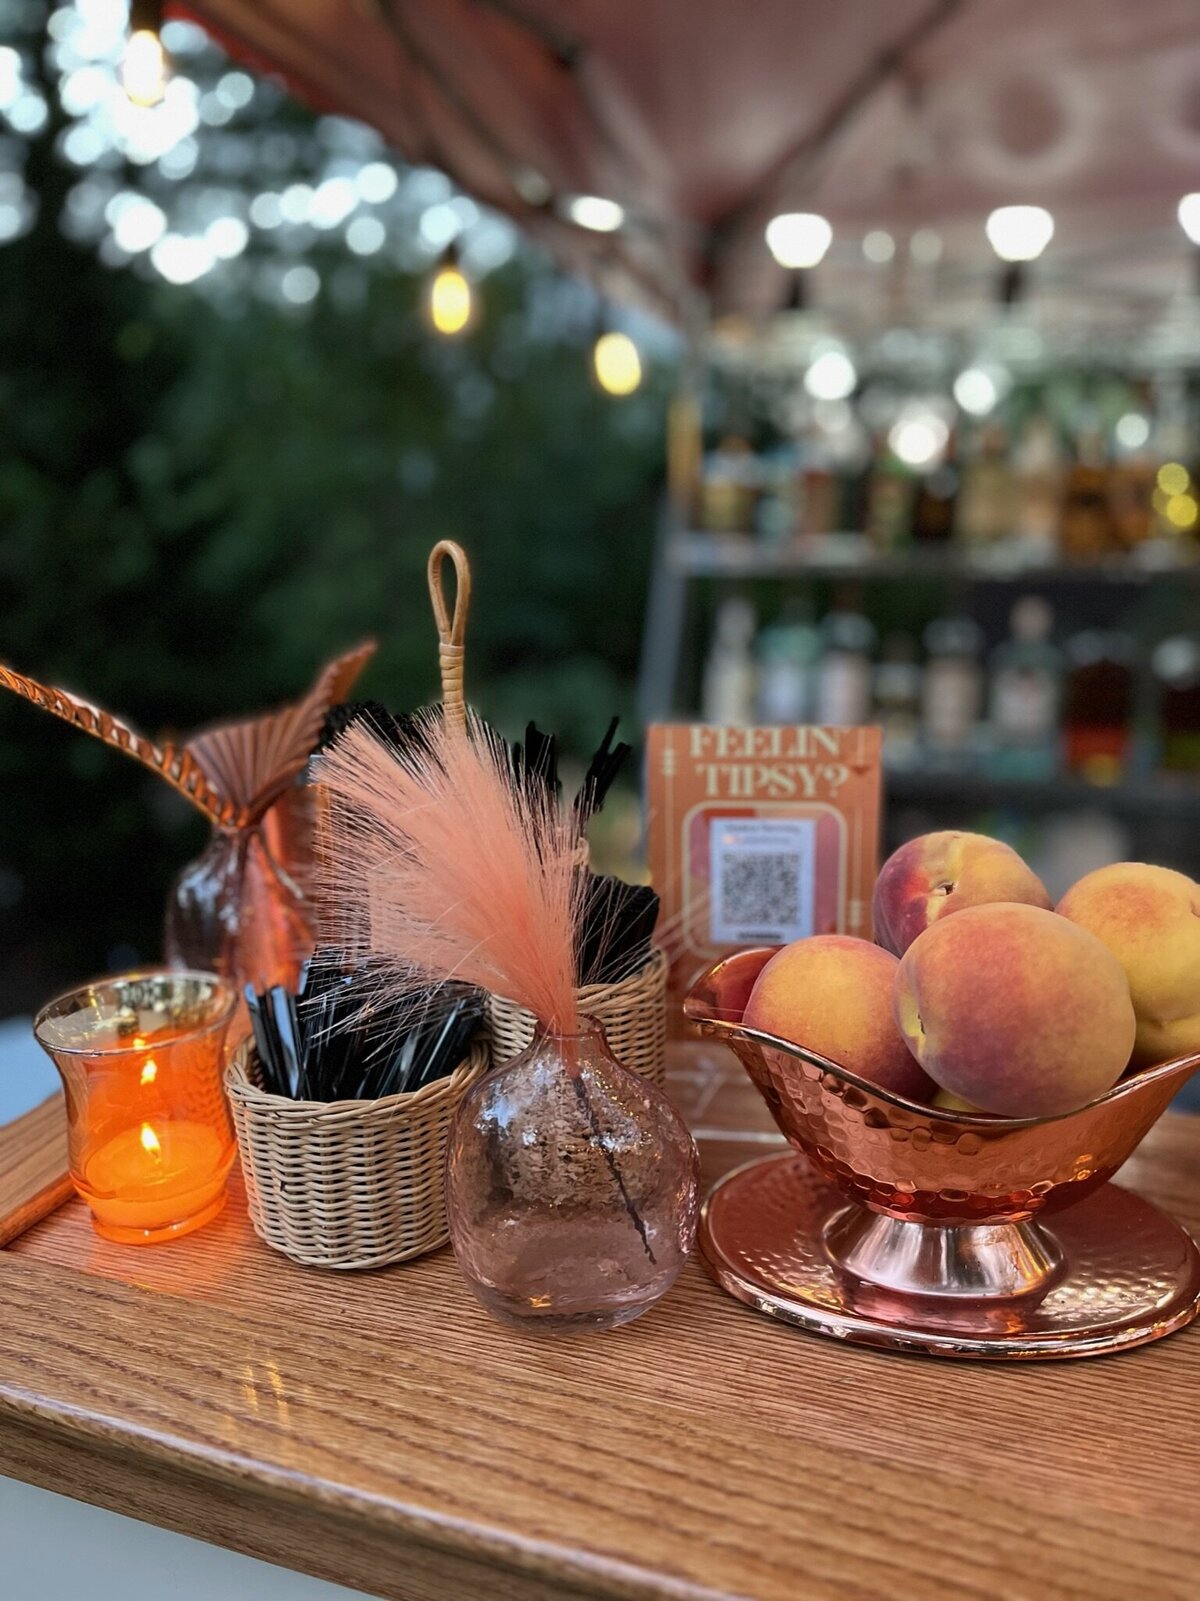 Bar decor and fruit sitting on bar top with candle